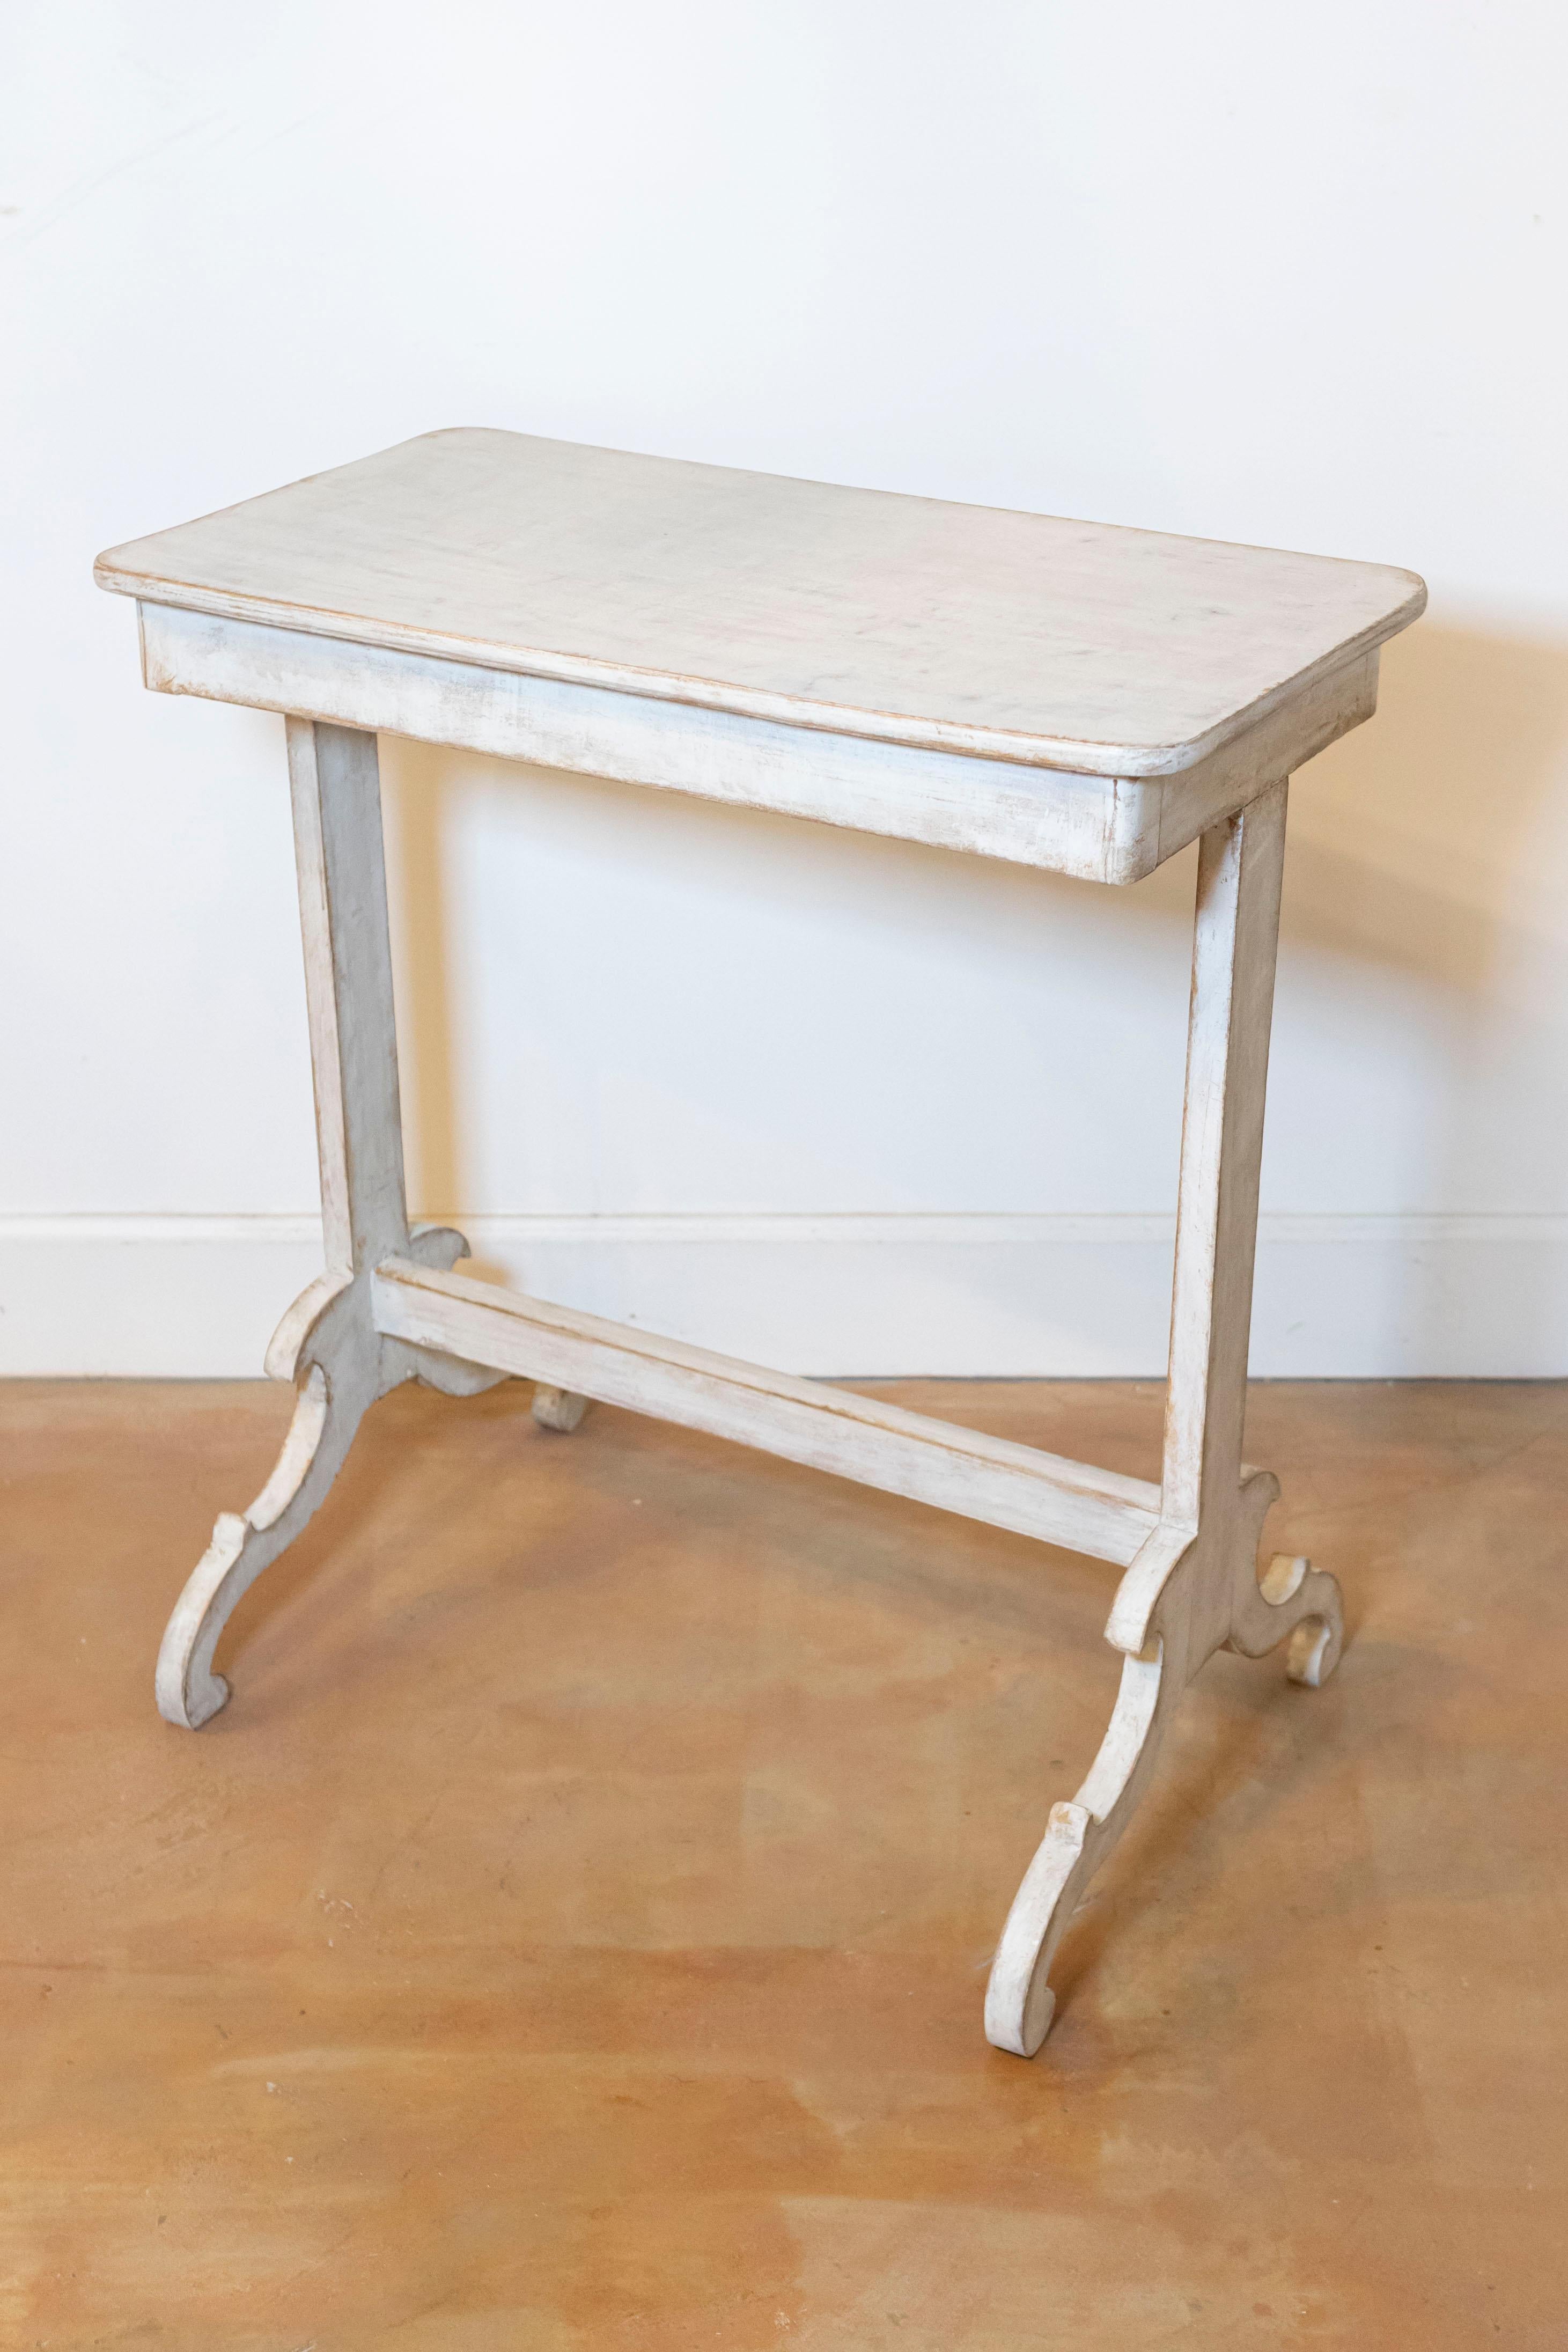 A Swedish side table from the 19th century with light gray painted finish and carved trestle base. Unveil the understated elegance of this 19th-century Swedish side table, a genuine antique treasure that whispers tales of yore. Coated in a serene